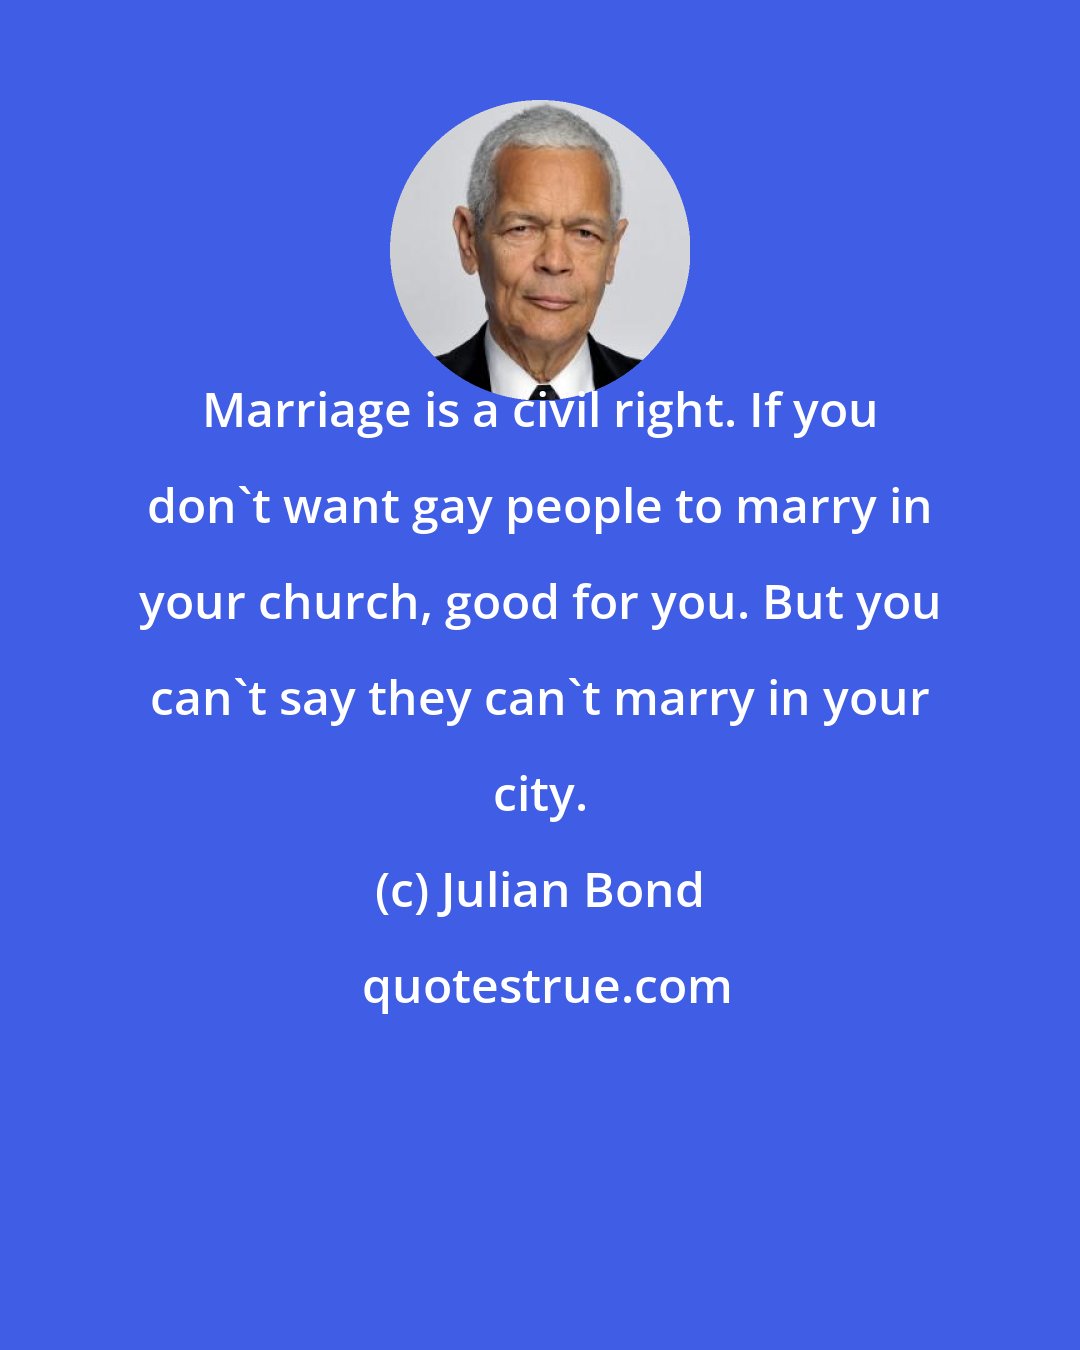 Julian Bond: Marriage is a civil right. If you don't want gay people to marry in your church, good for you. But you can't say they can't marry in your city.